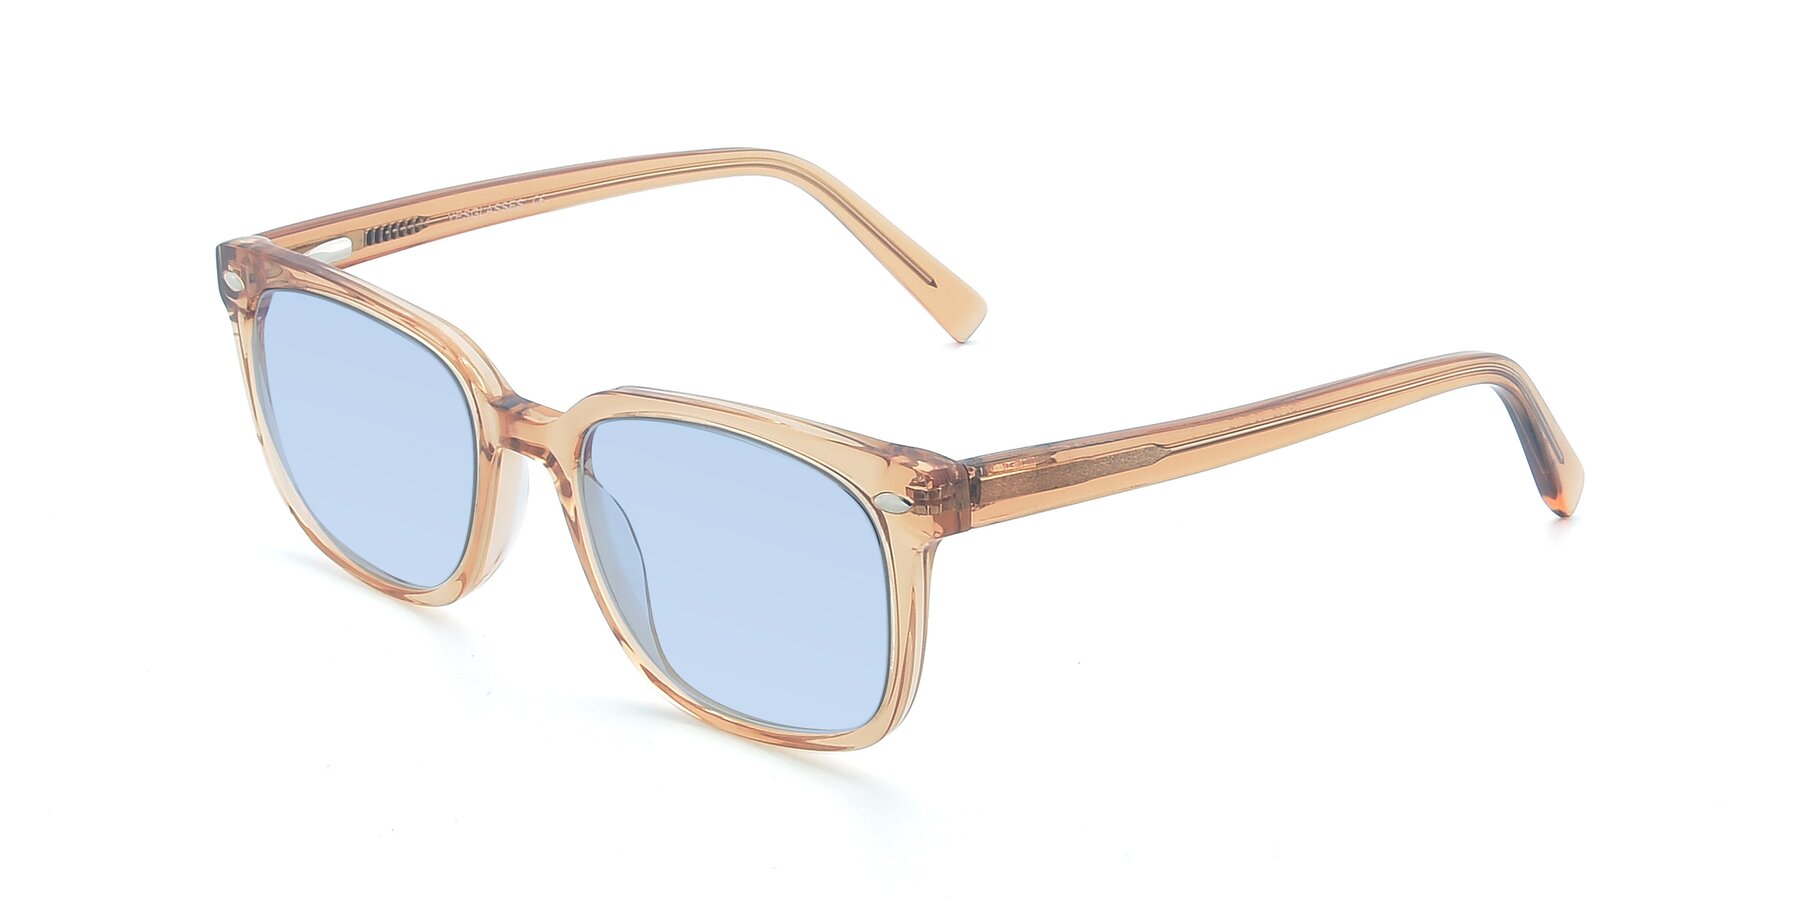 Angle of 17349 in Transparent Caramel with Light Blue Tinted Lenses